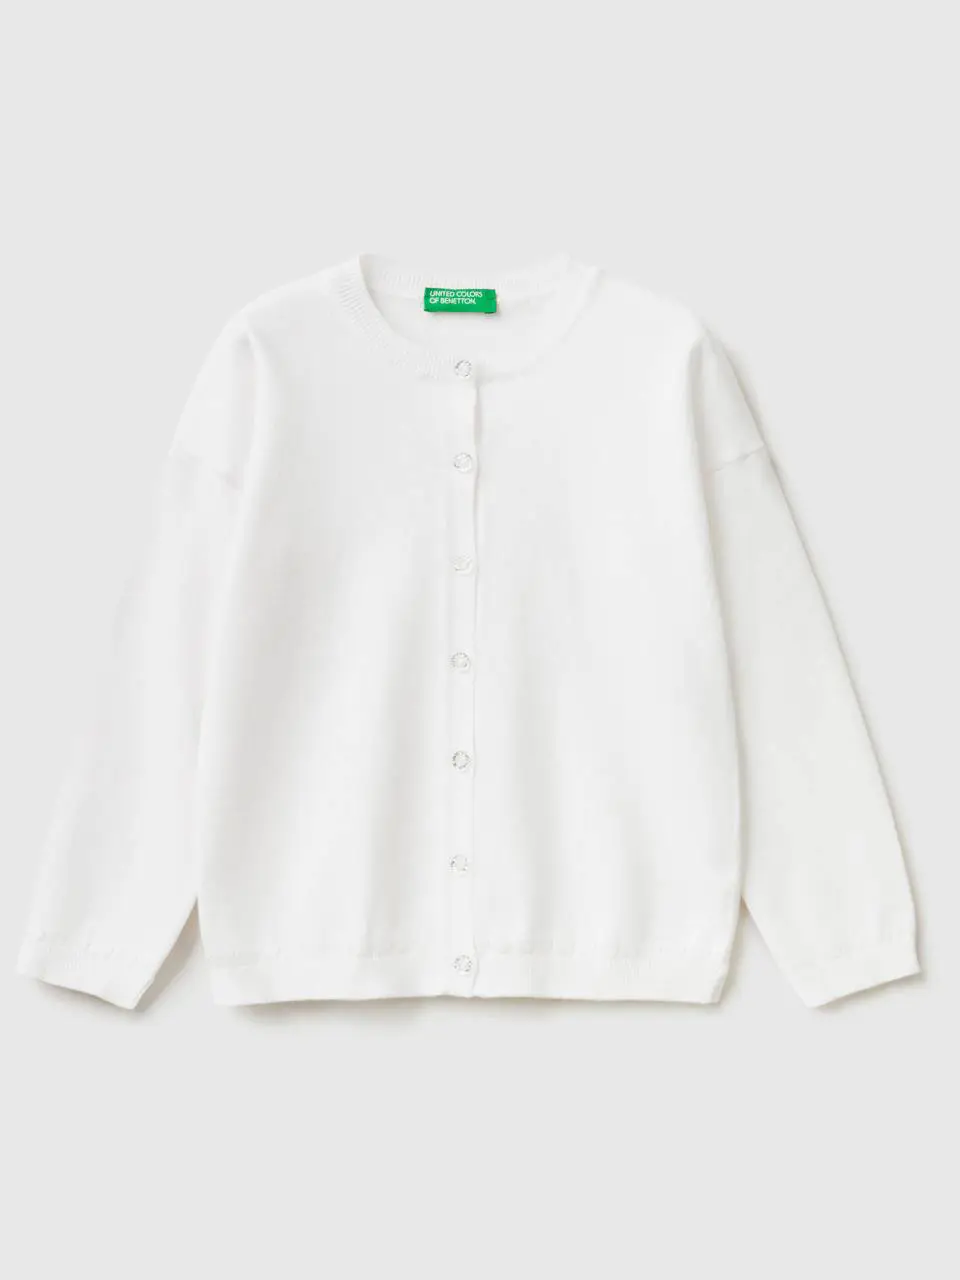 Benetton cardigan with glittery buttons. 1